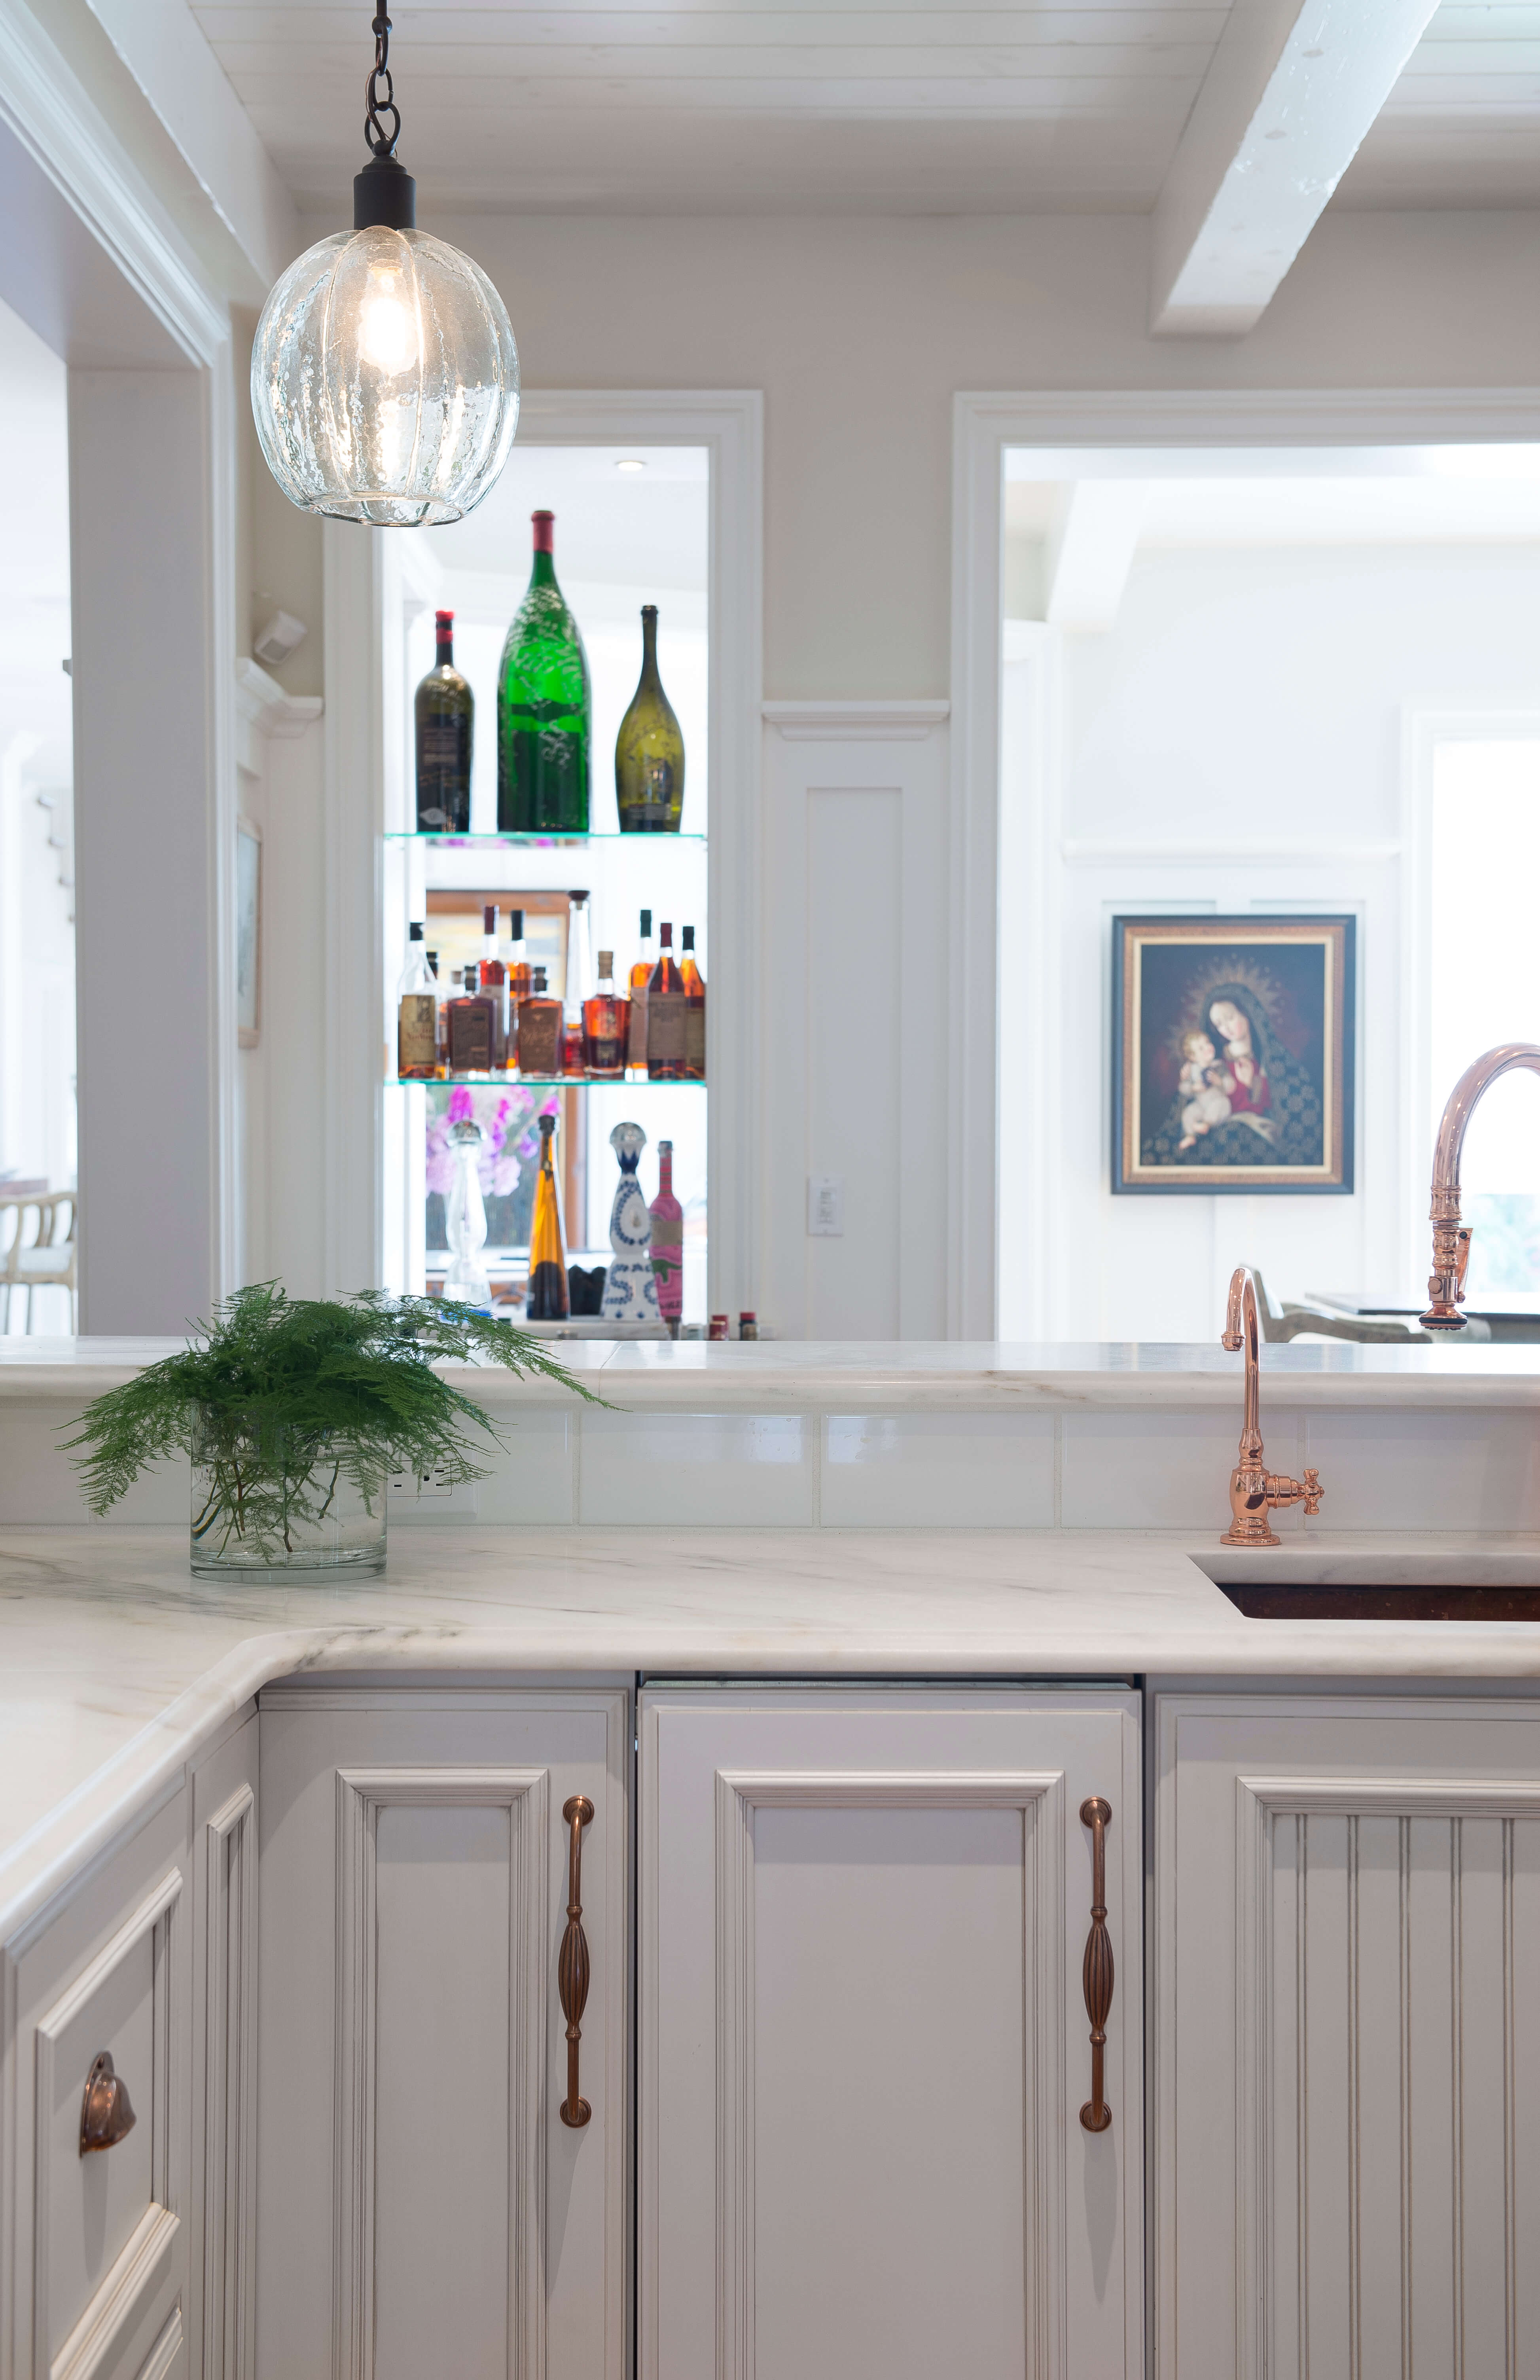 An ice maker is located to the left of the sink for convenience.